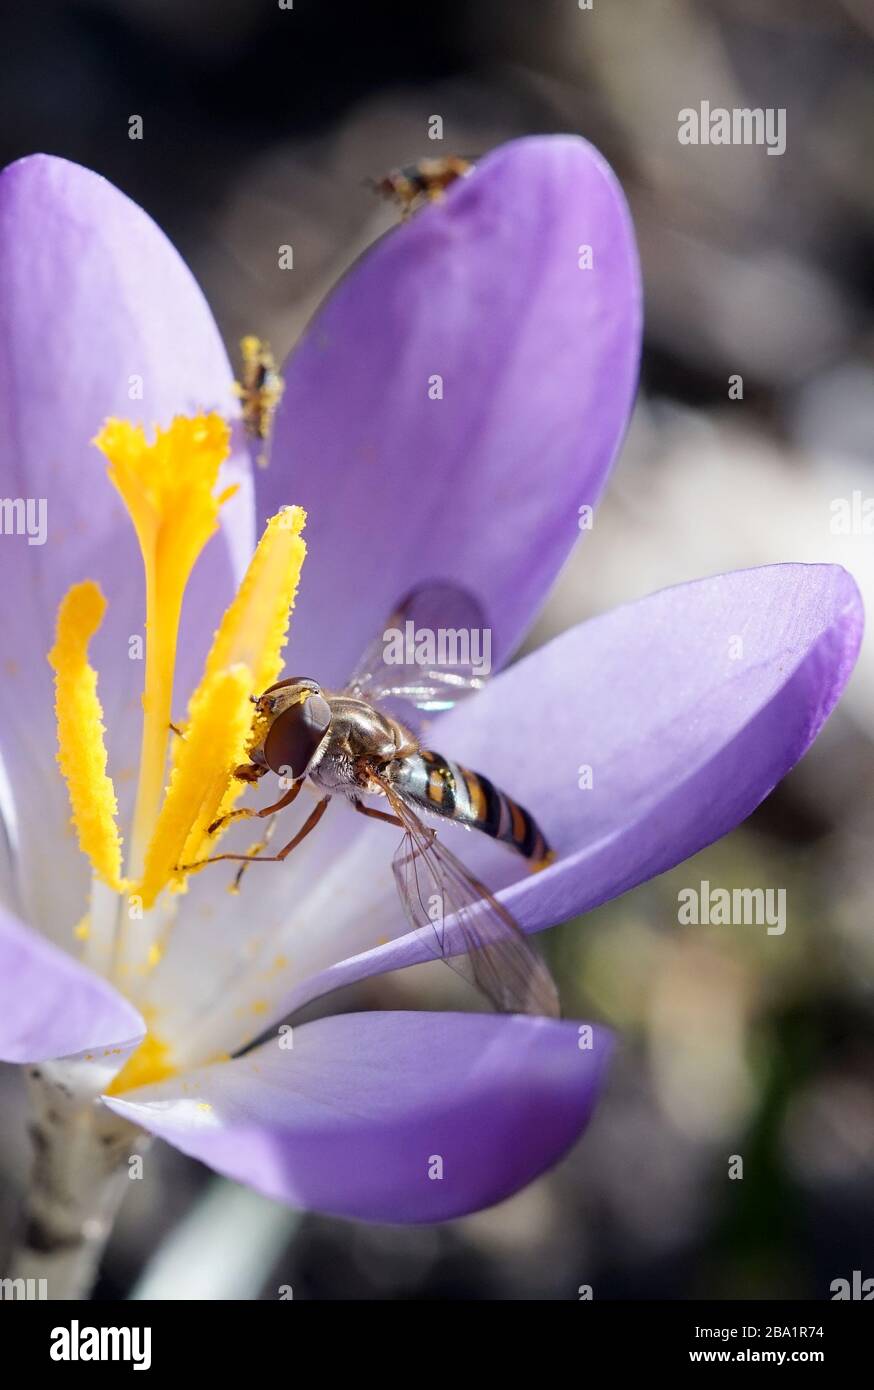 marmalade hoverfly eats crocus pollen in early spring in the garden Stock Photo